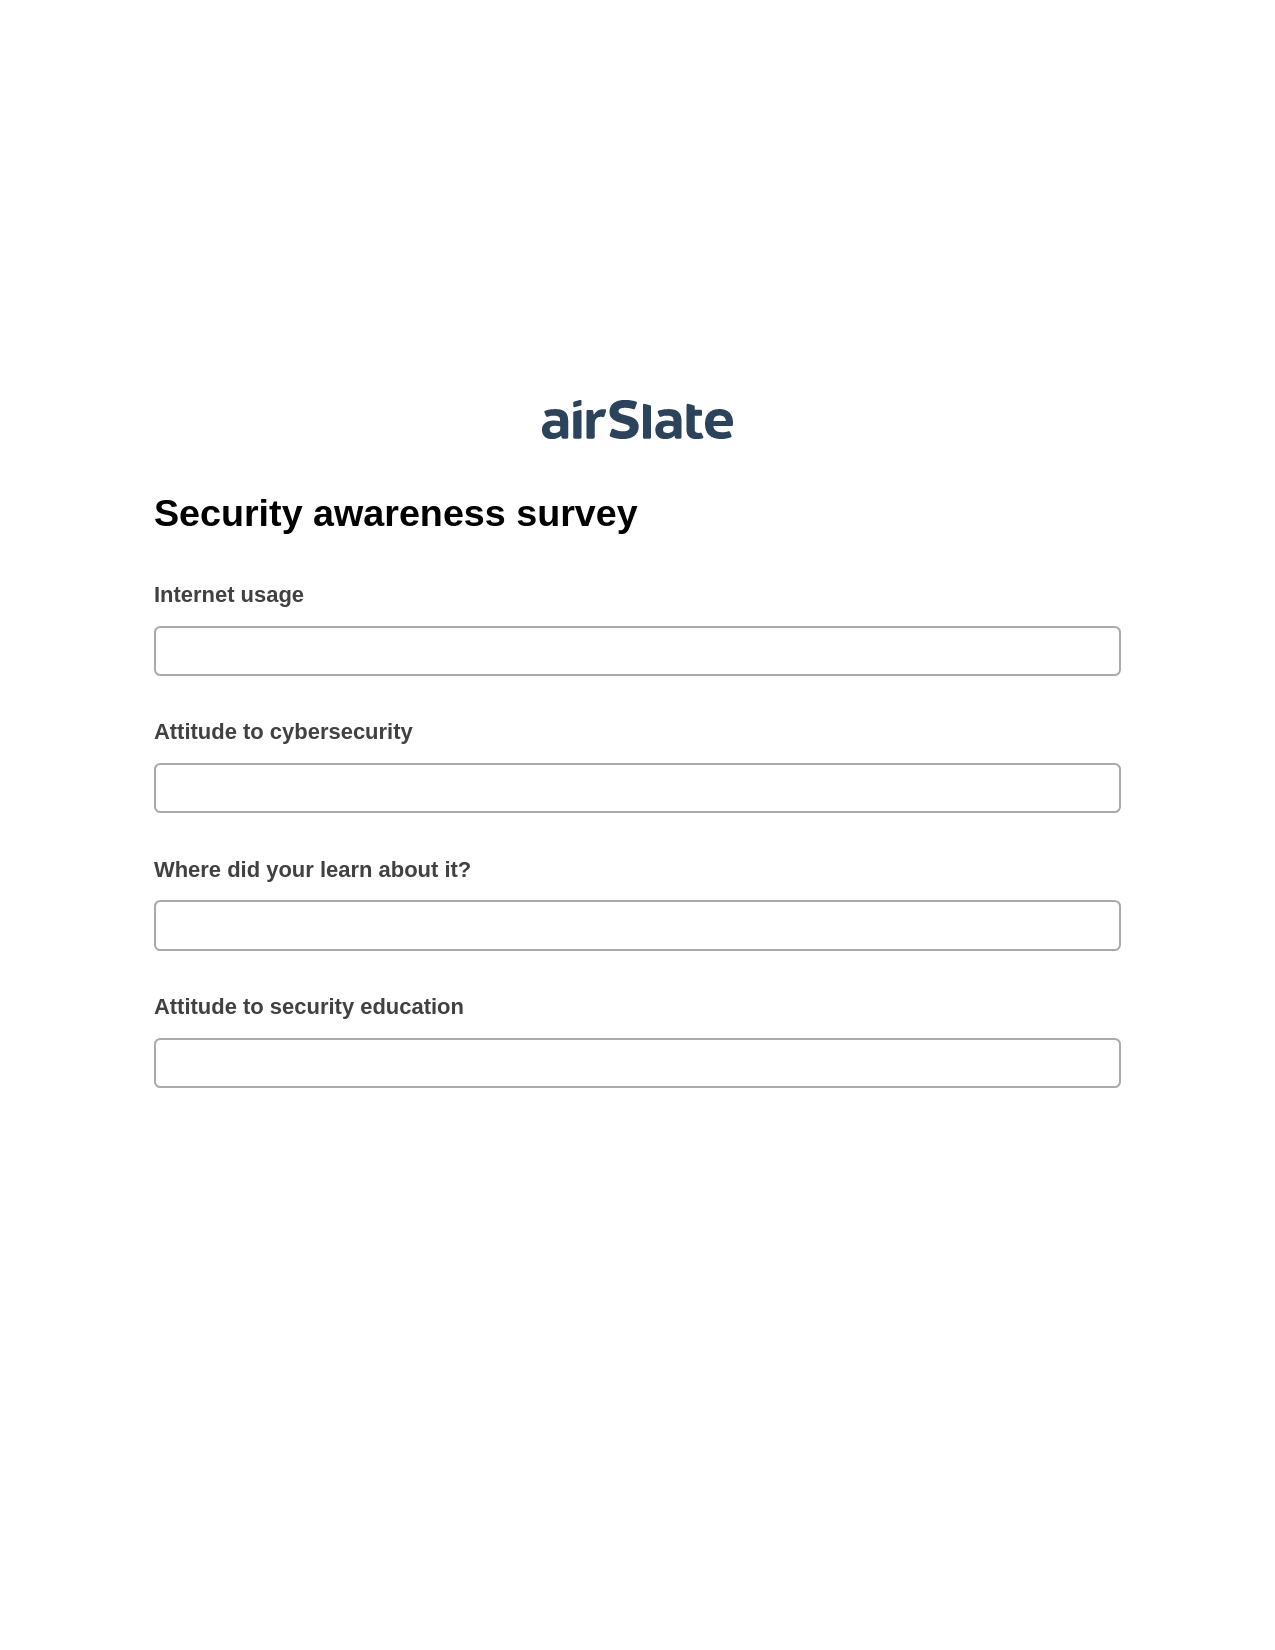 Multirole Security awareness survey Pre-fill from another Slate Bot, SendGrid send Campaign bot, Slack Two-Way Binding Bot